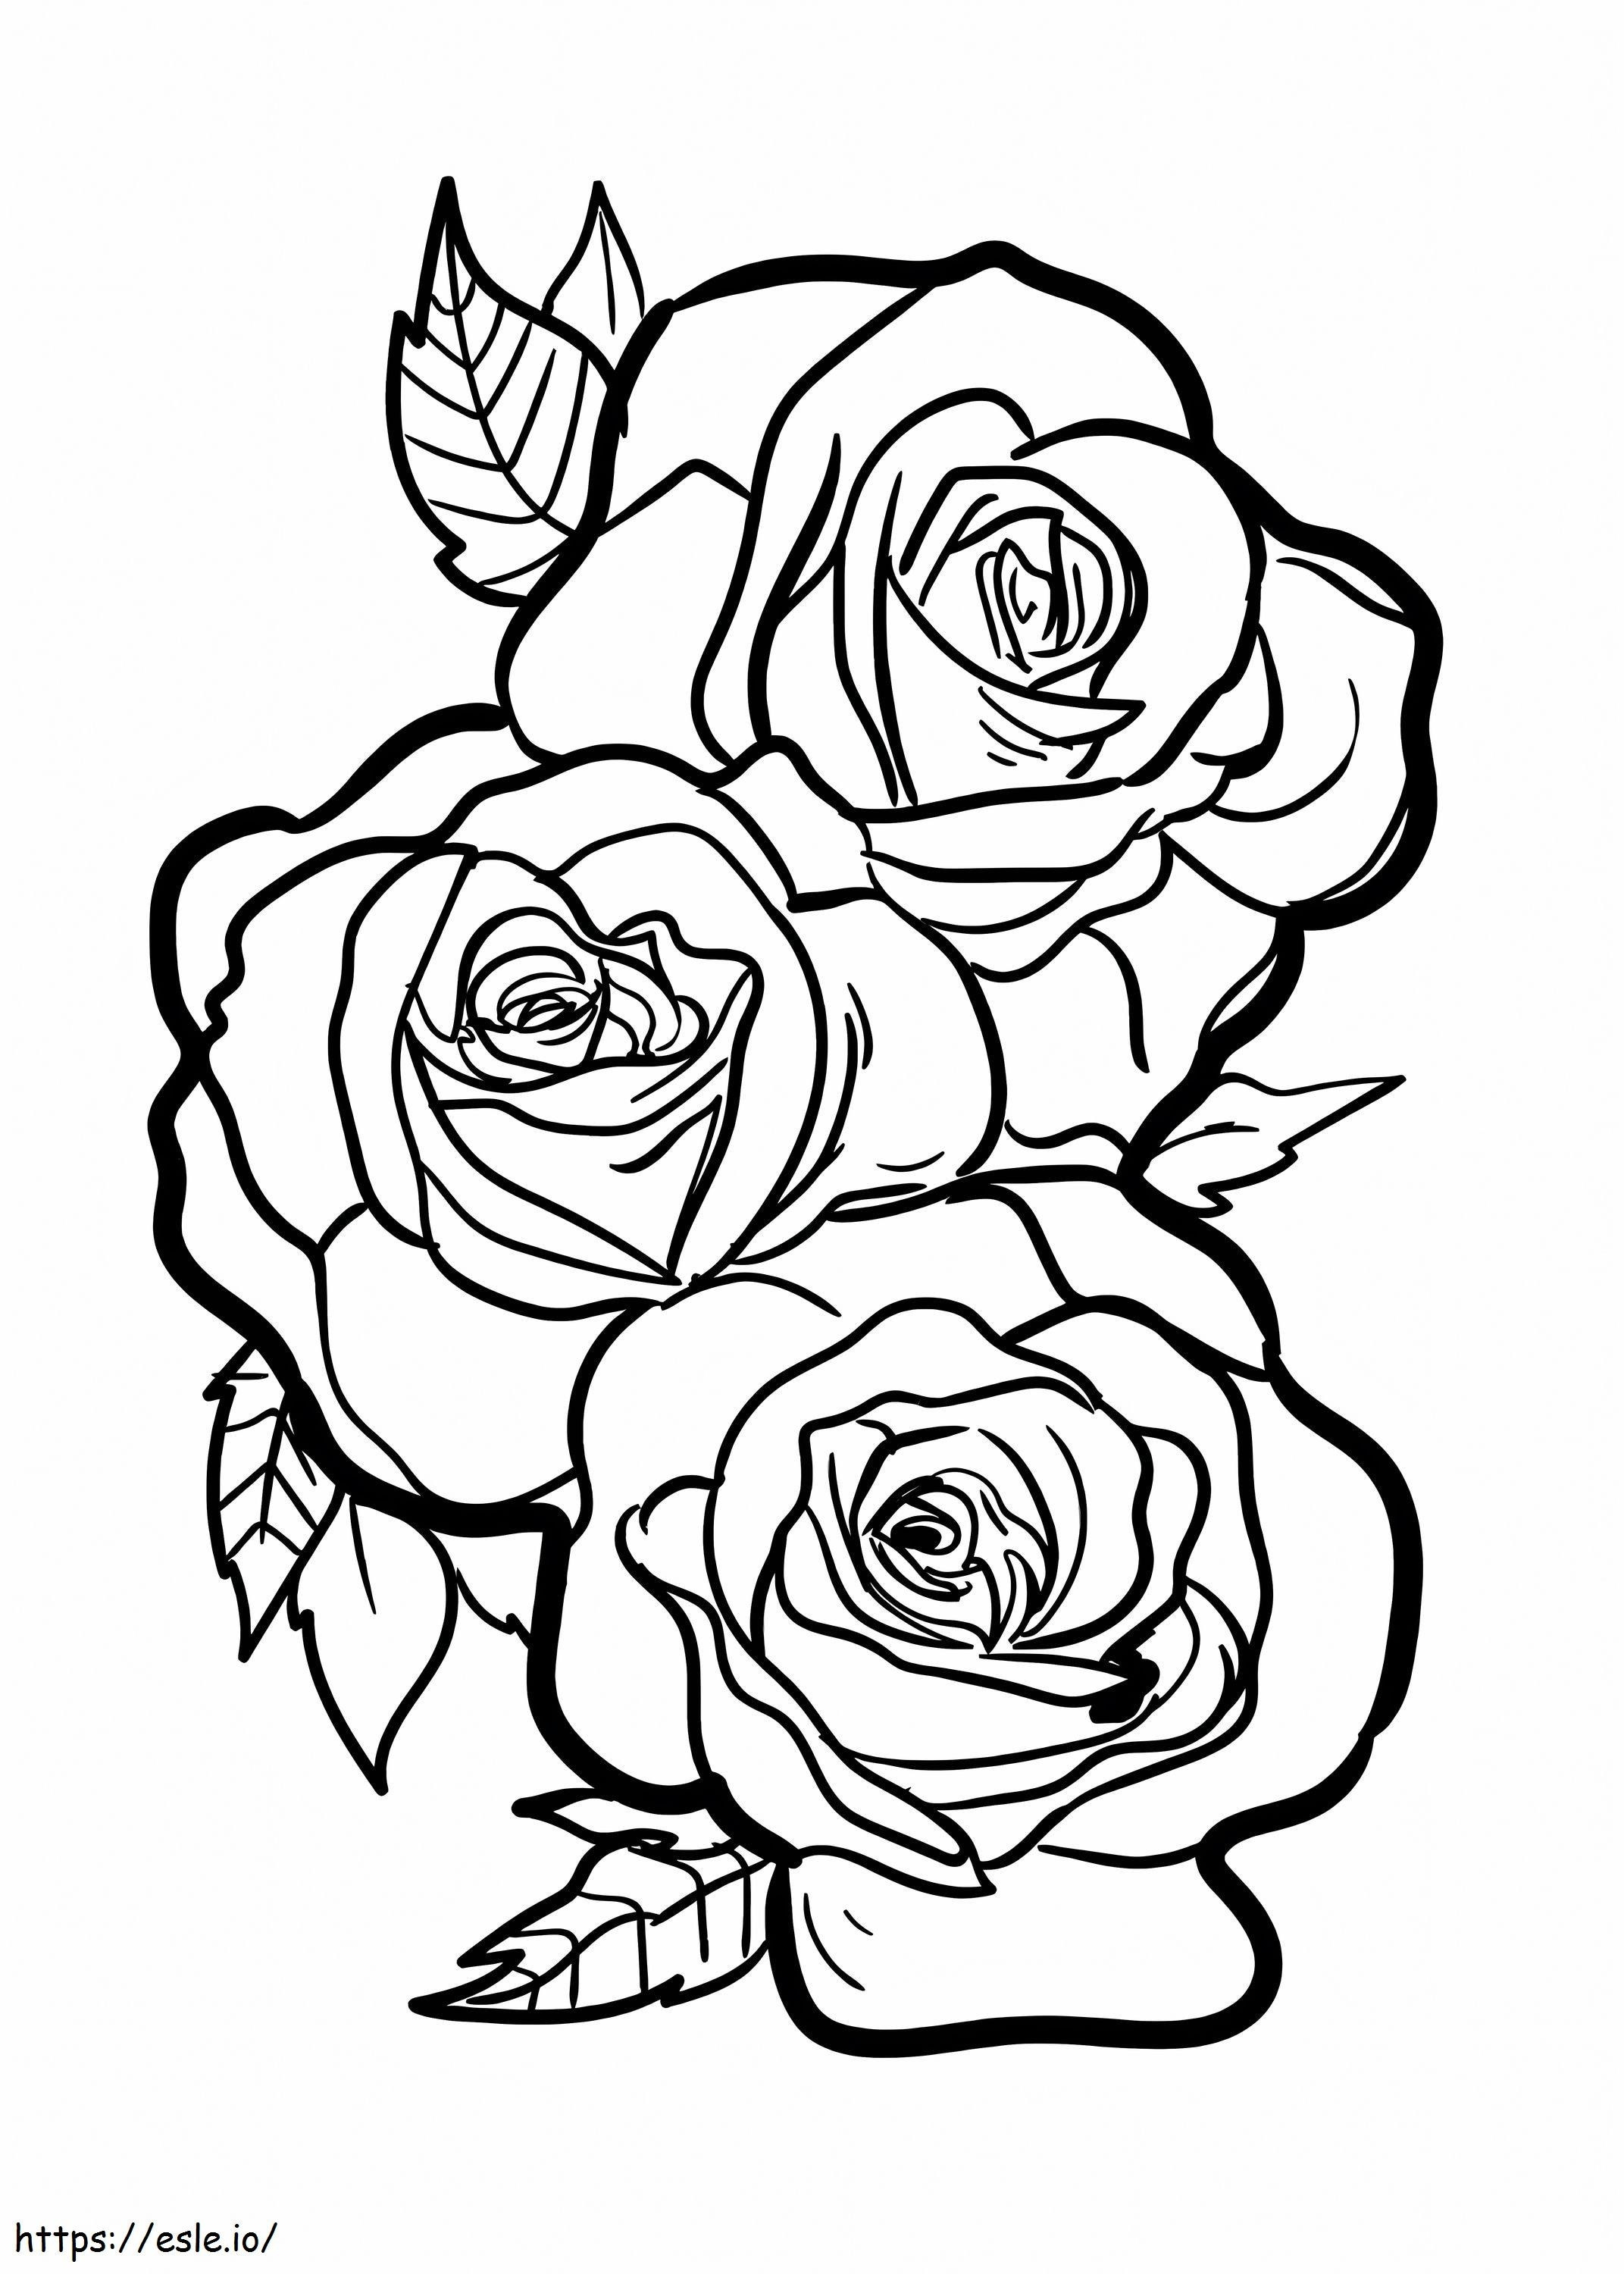 Three Roses coloring page